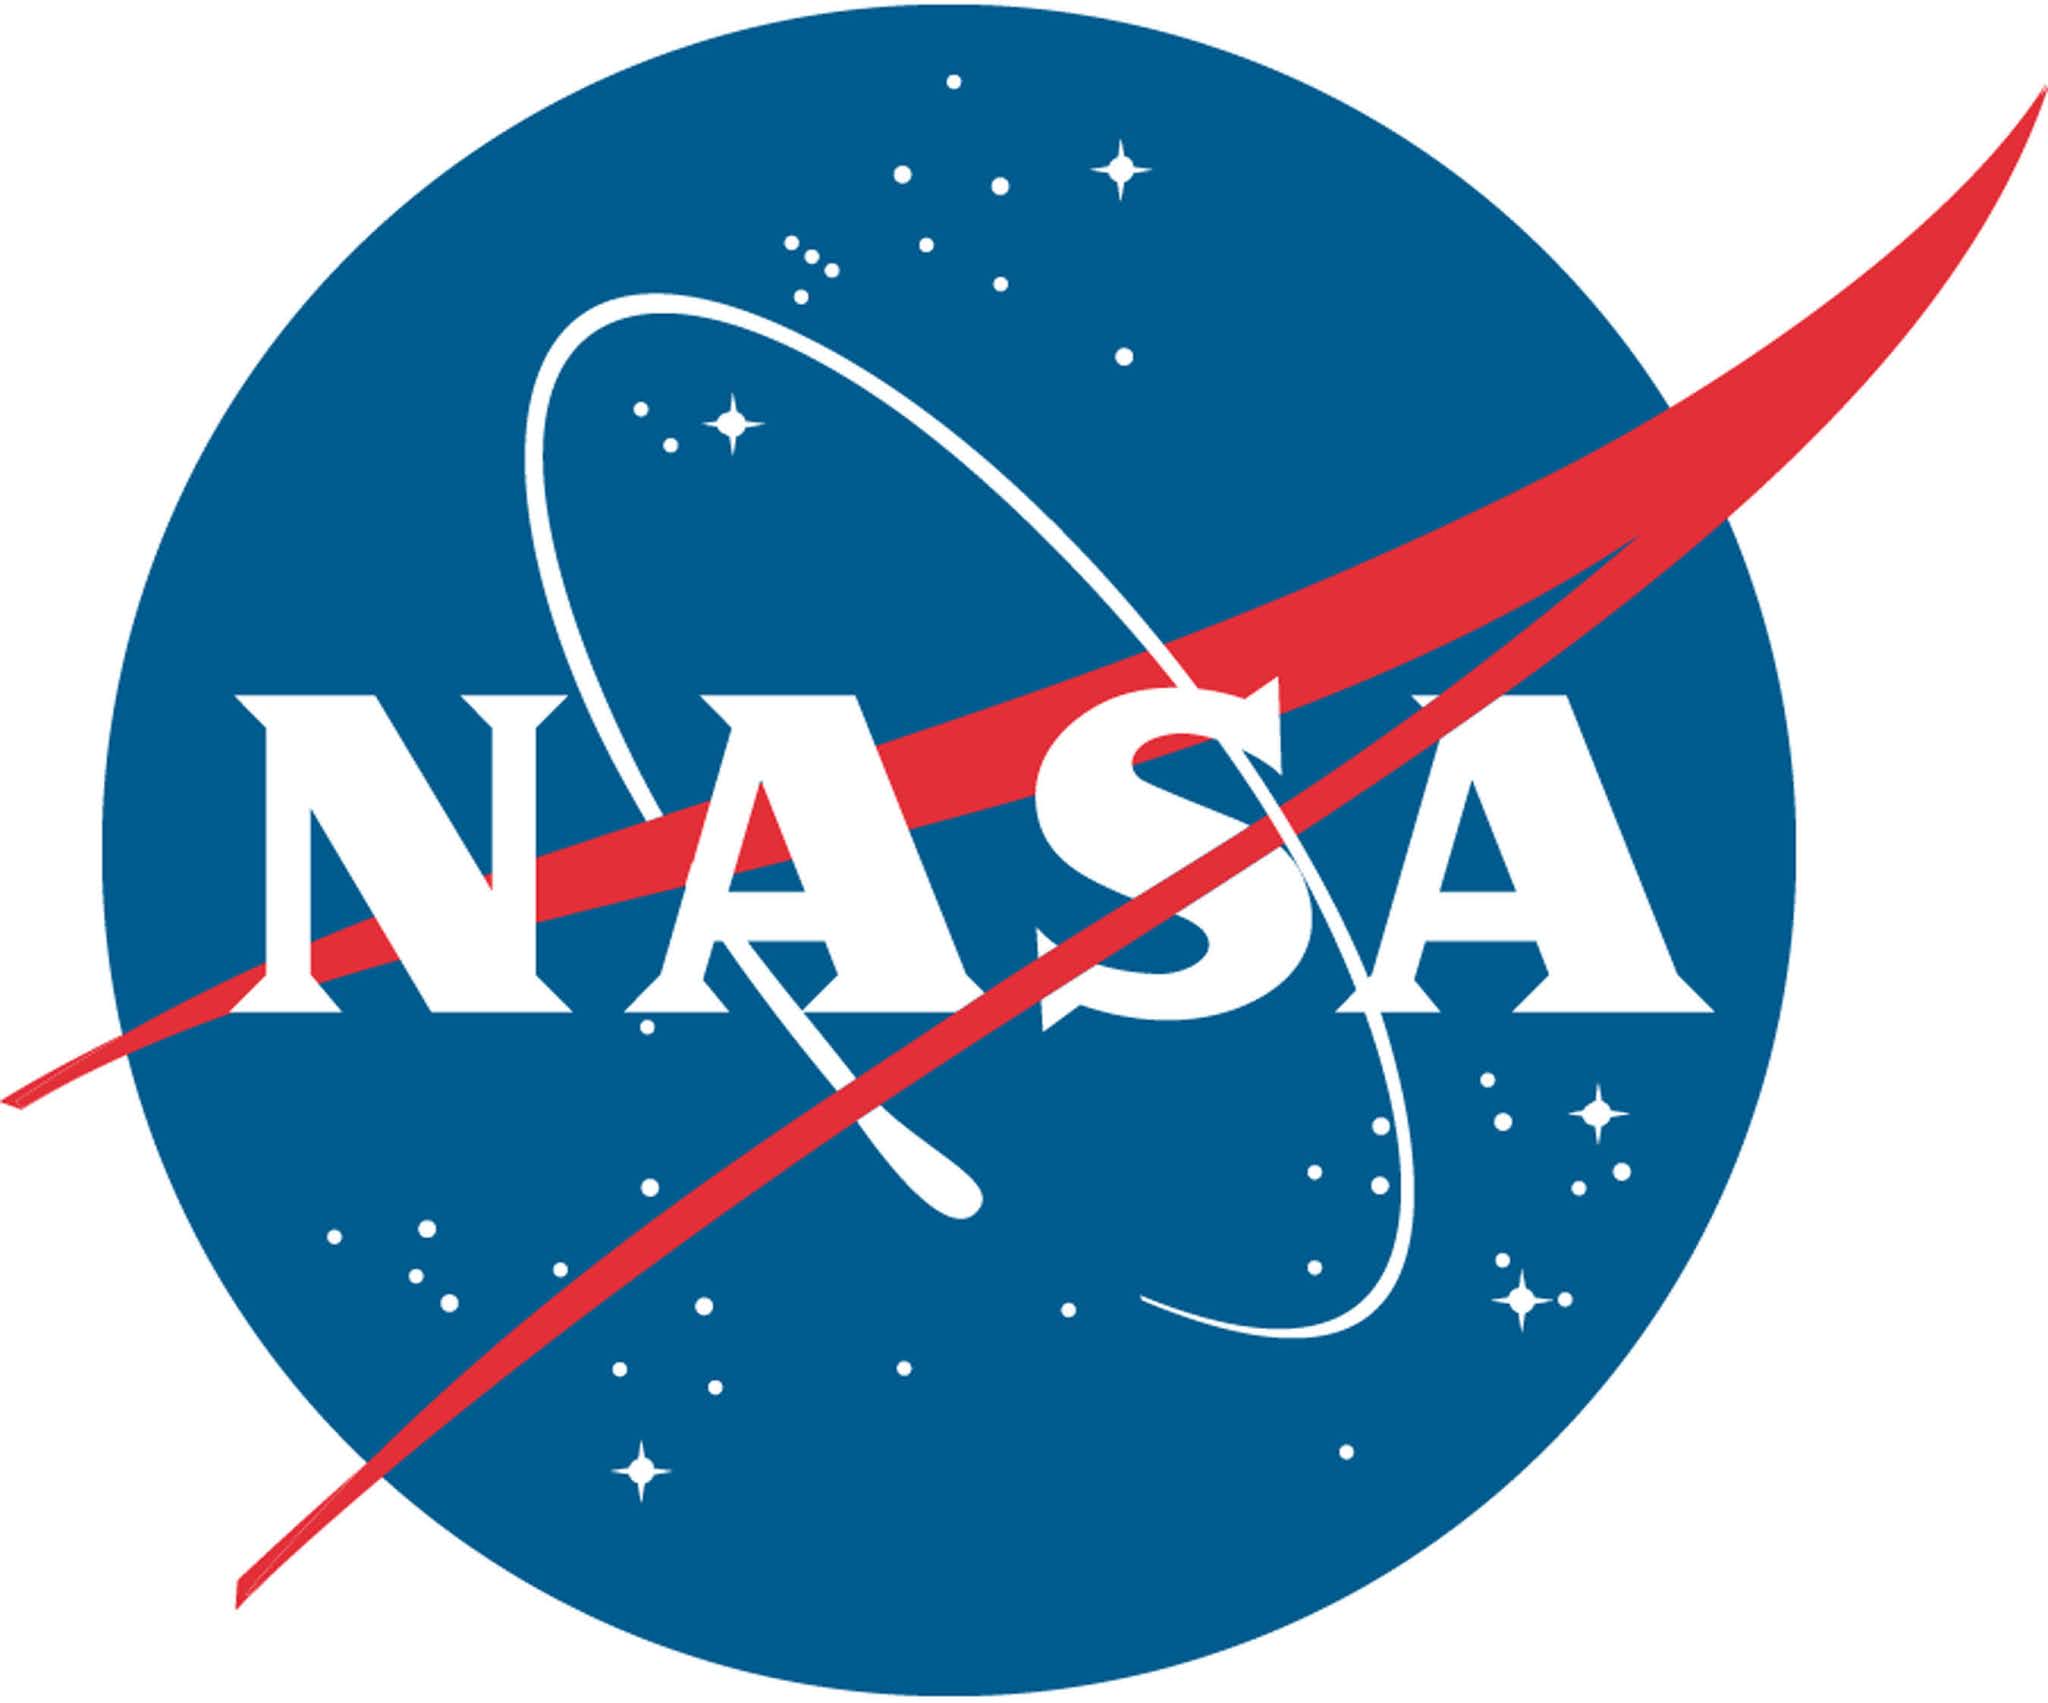 NASA Launches Mission Equity, Seeks Public Input to Broaden Access